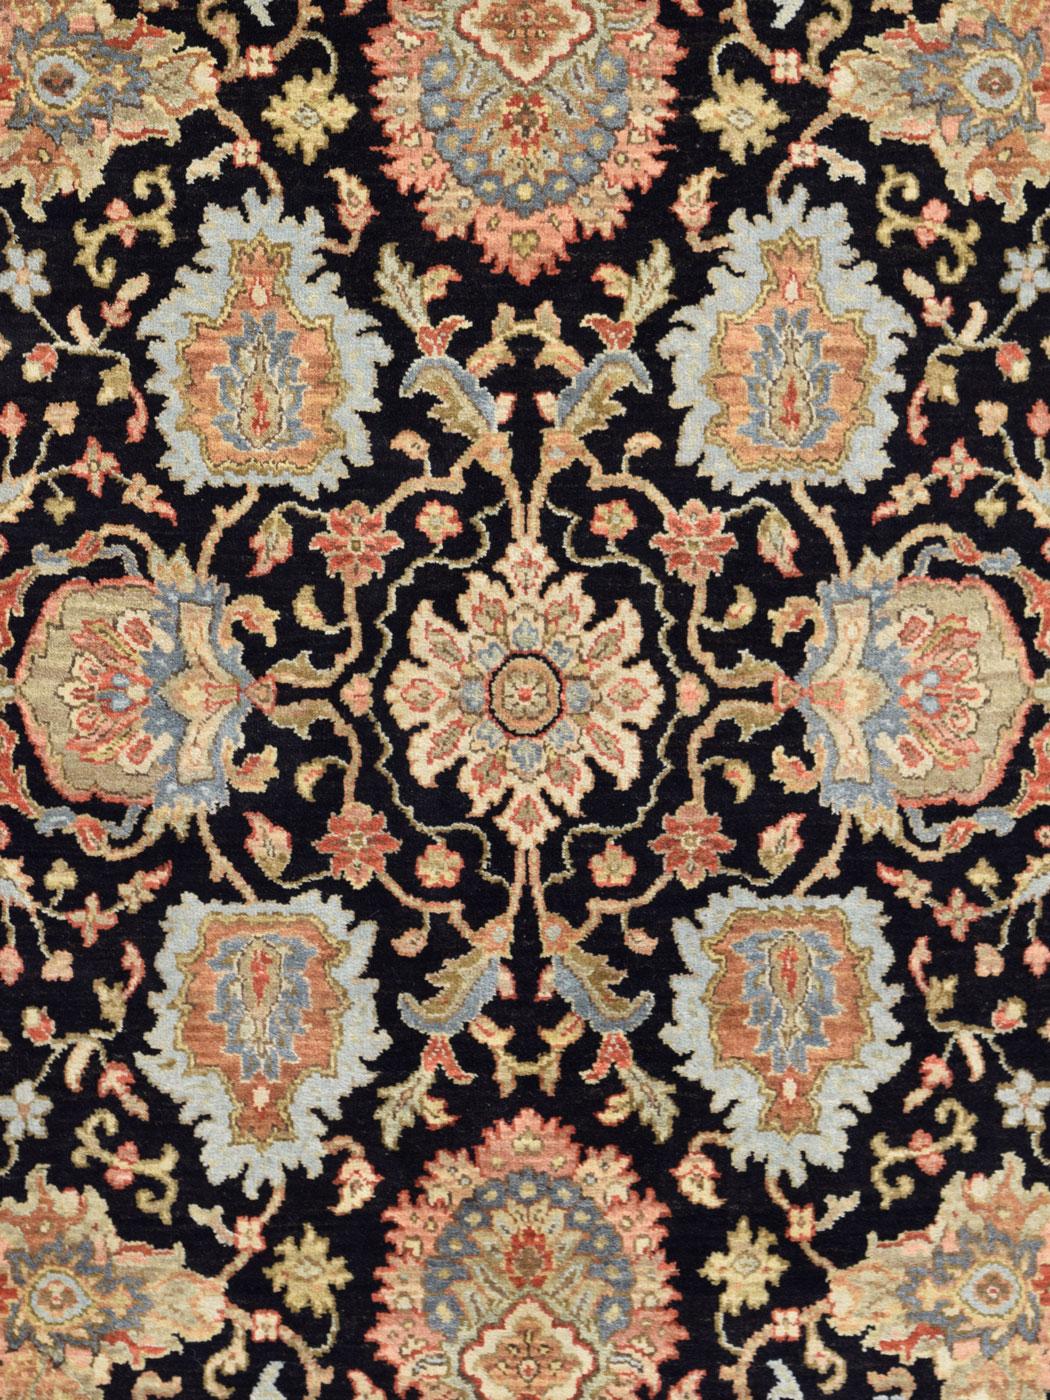 Hand-Knotted Persian Agra Carpet, Red, Orange, and Black Wool, 6' x 9' In New Condition For Sale In New York, NY